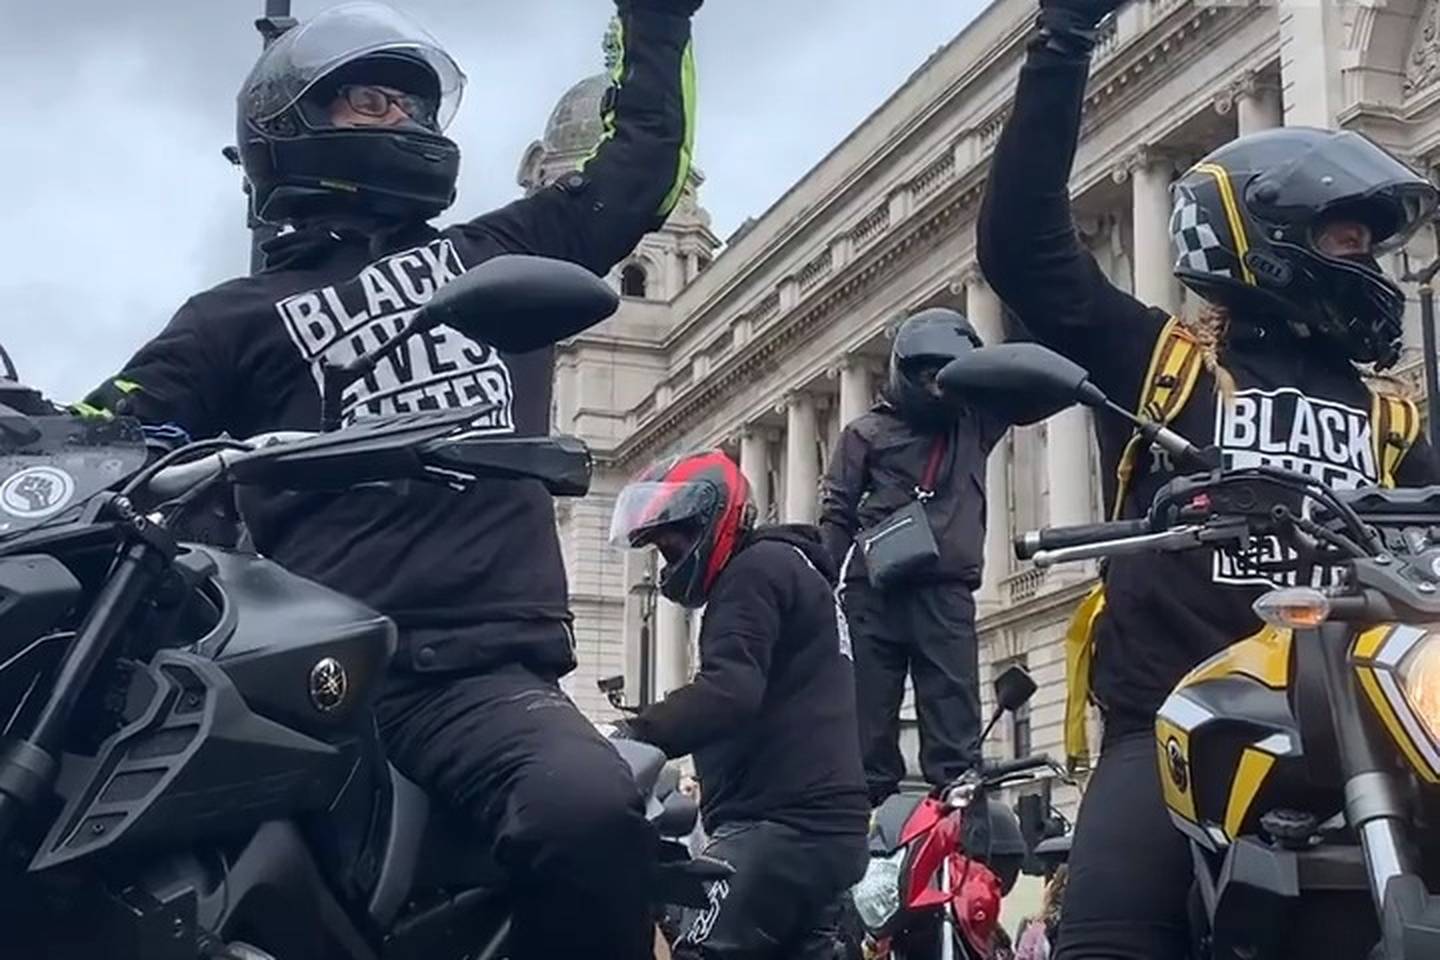 London's Black Lives Matter protesters in their own words